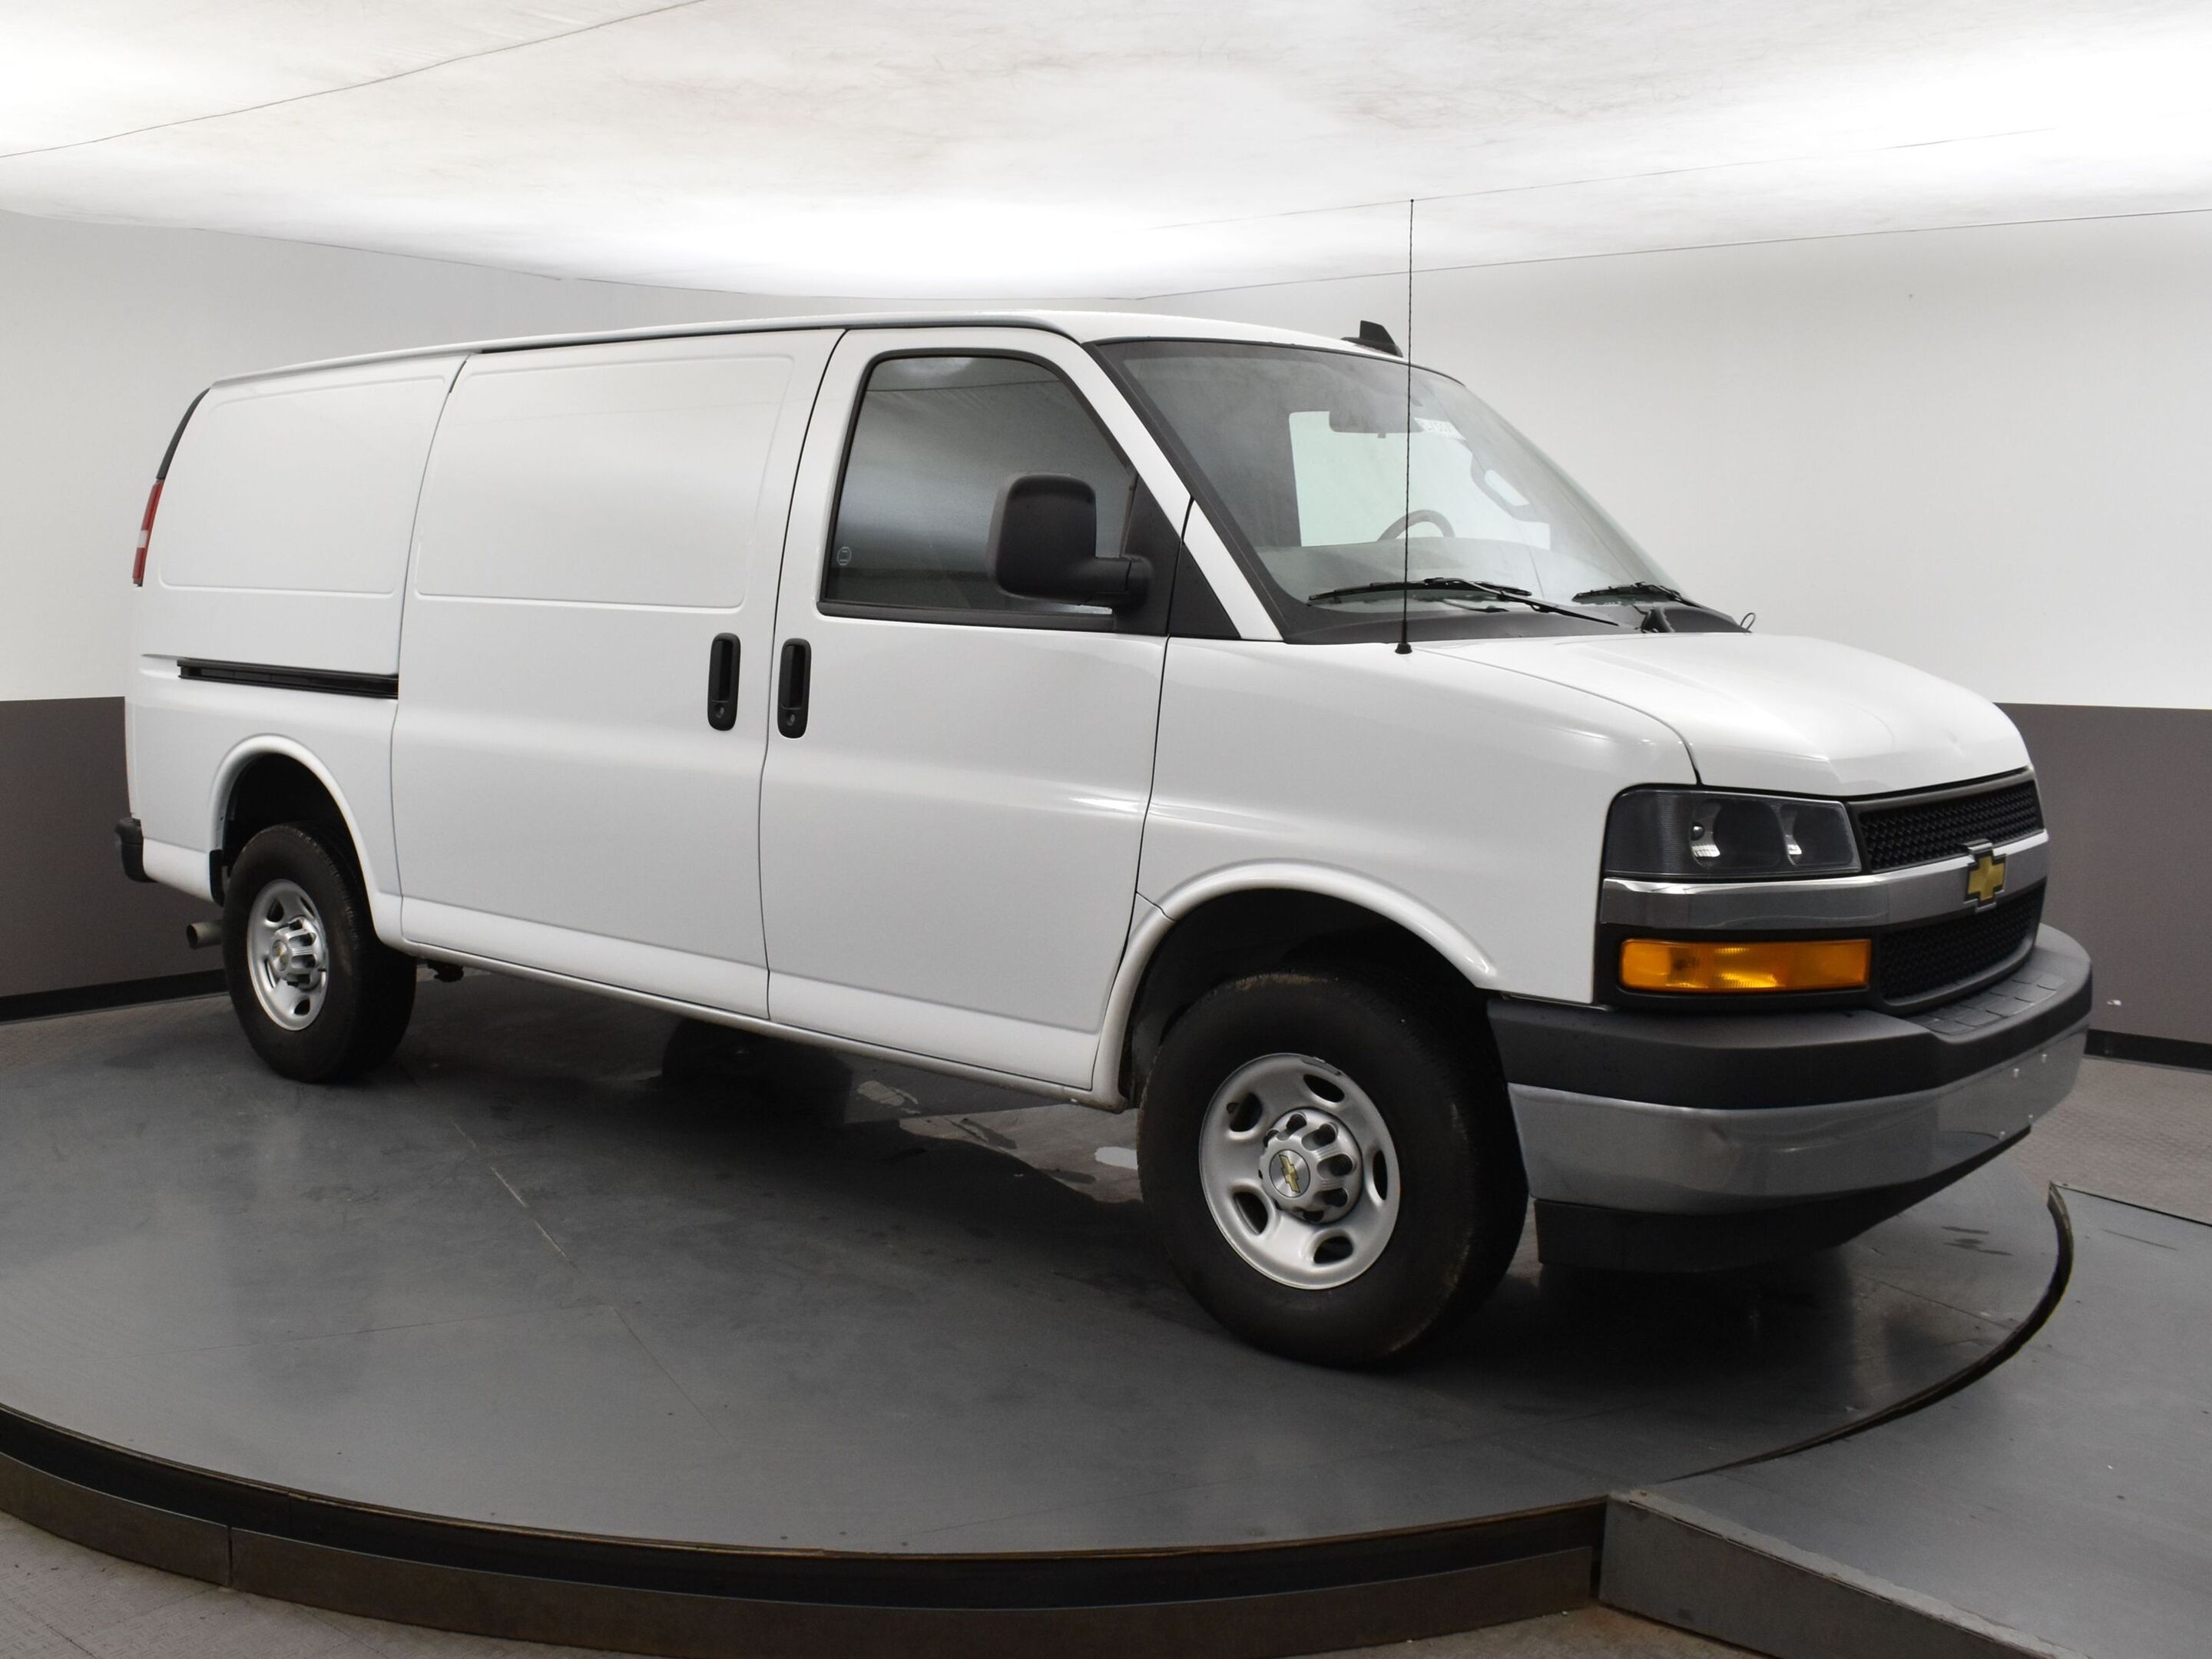 2023 Chevrolet Express TEXT 902-200-4475 for info